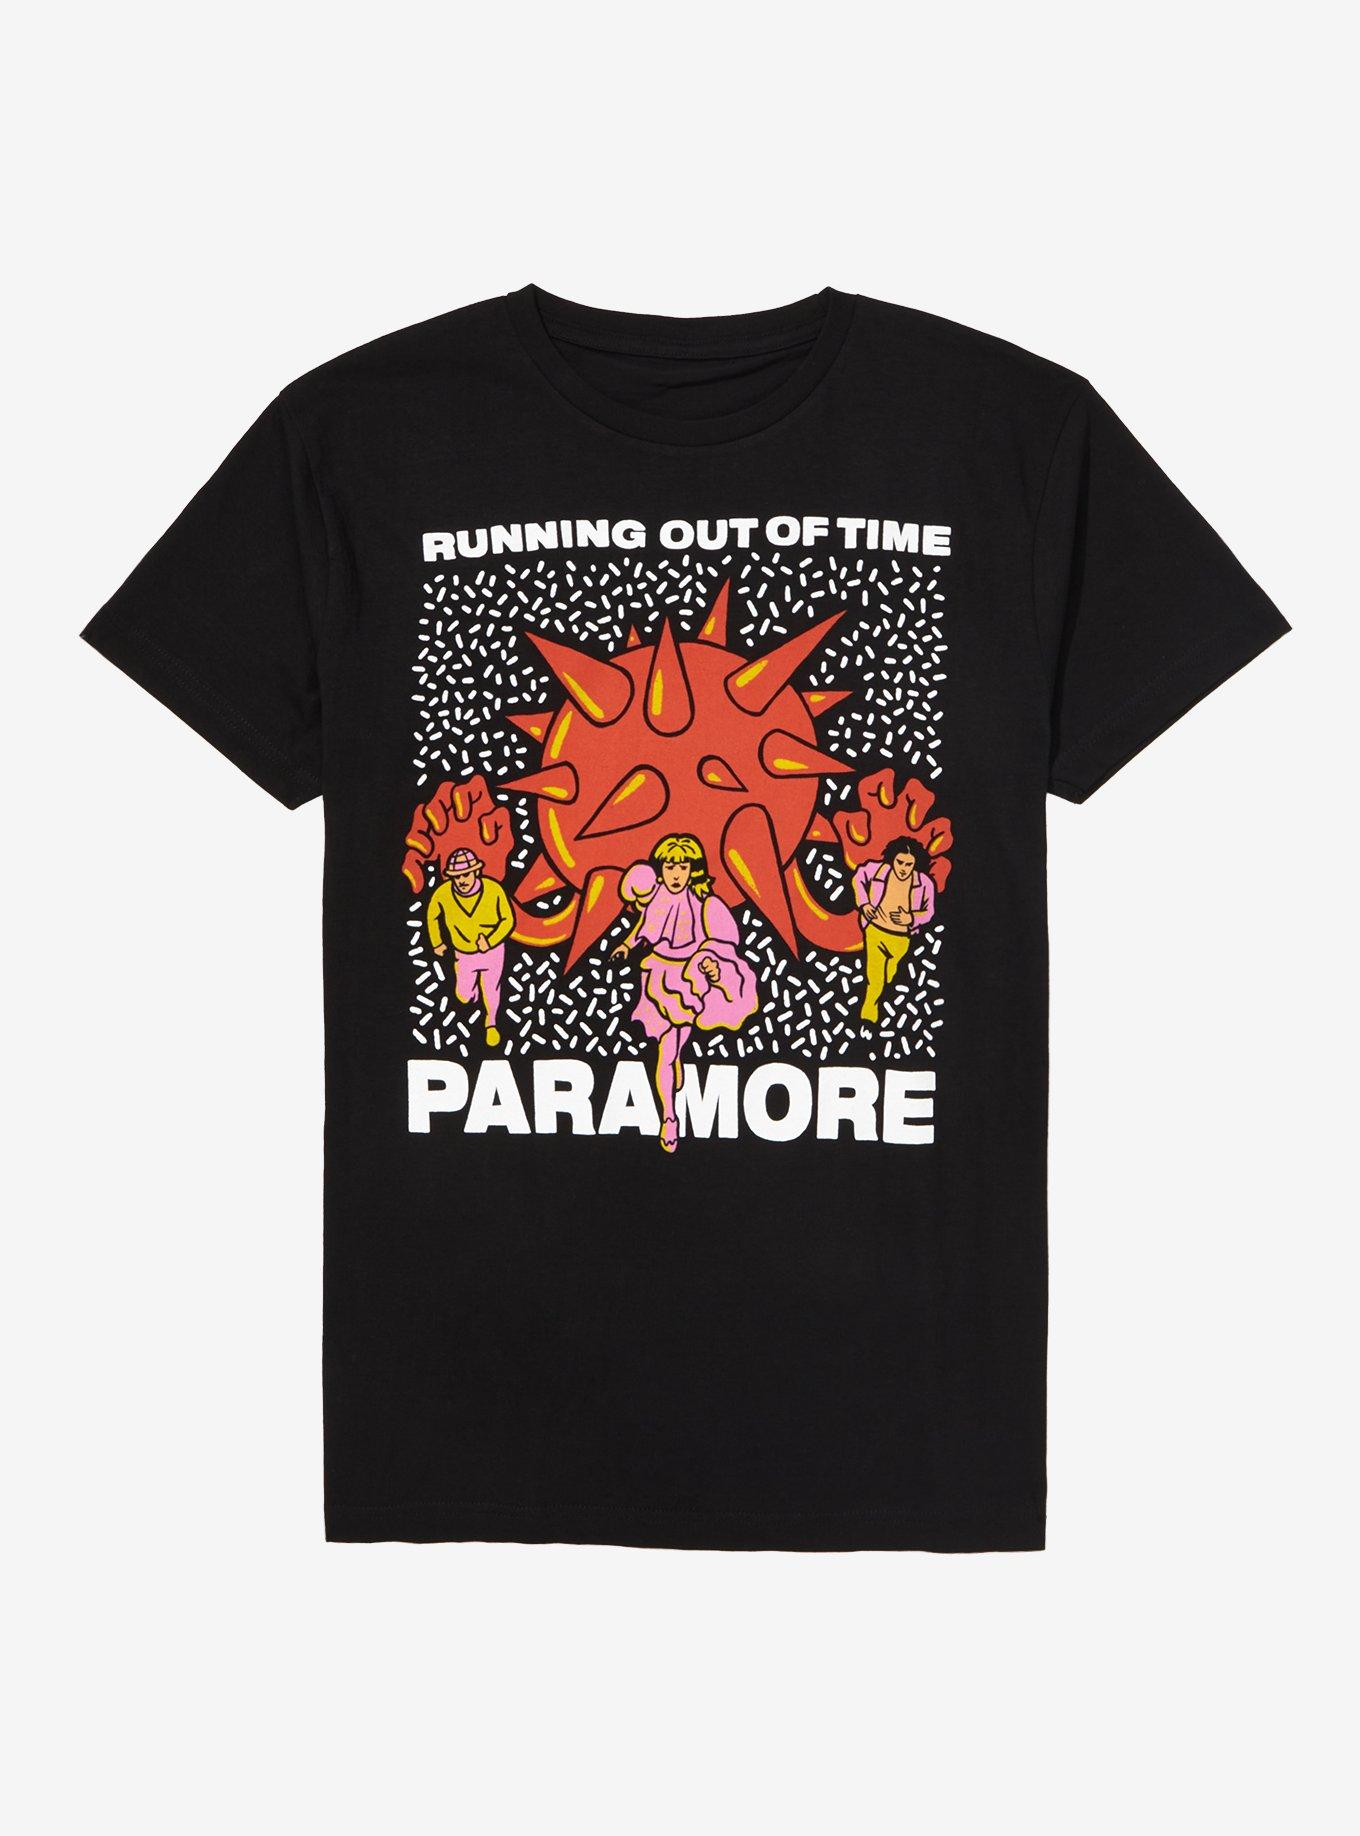 Paramore Lyrics Merch & Gifts for Sale